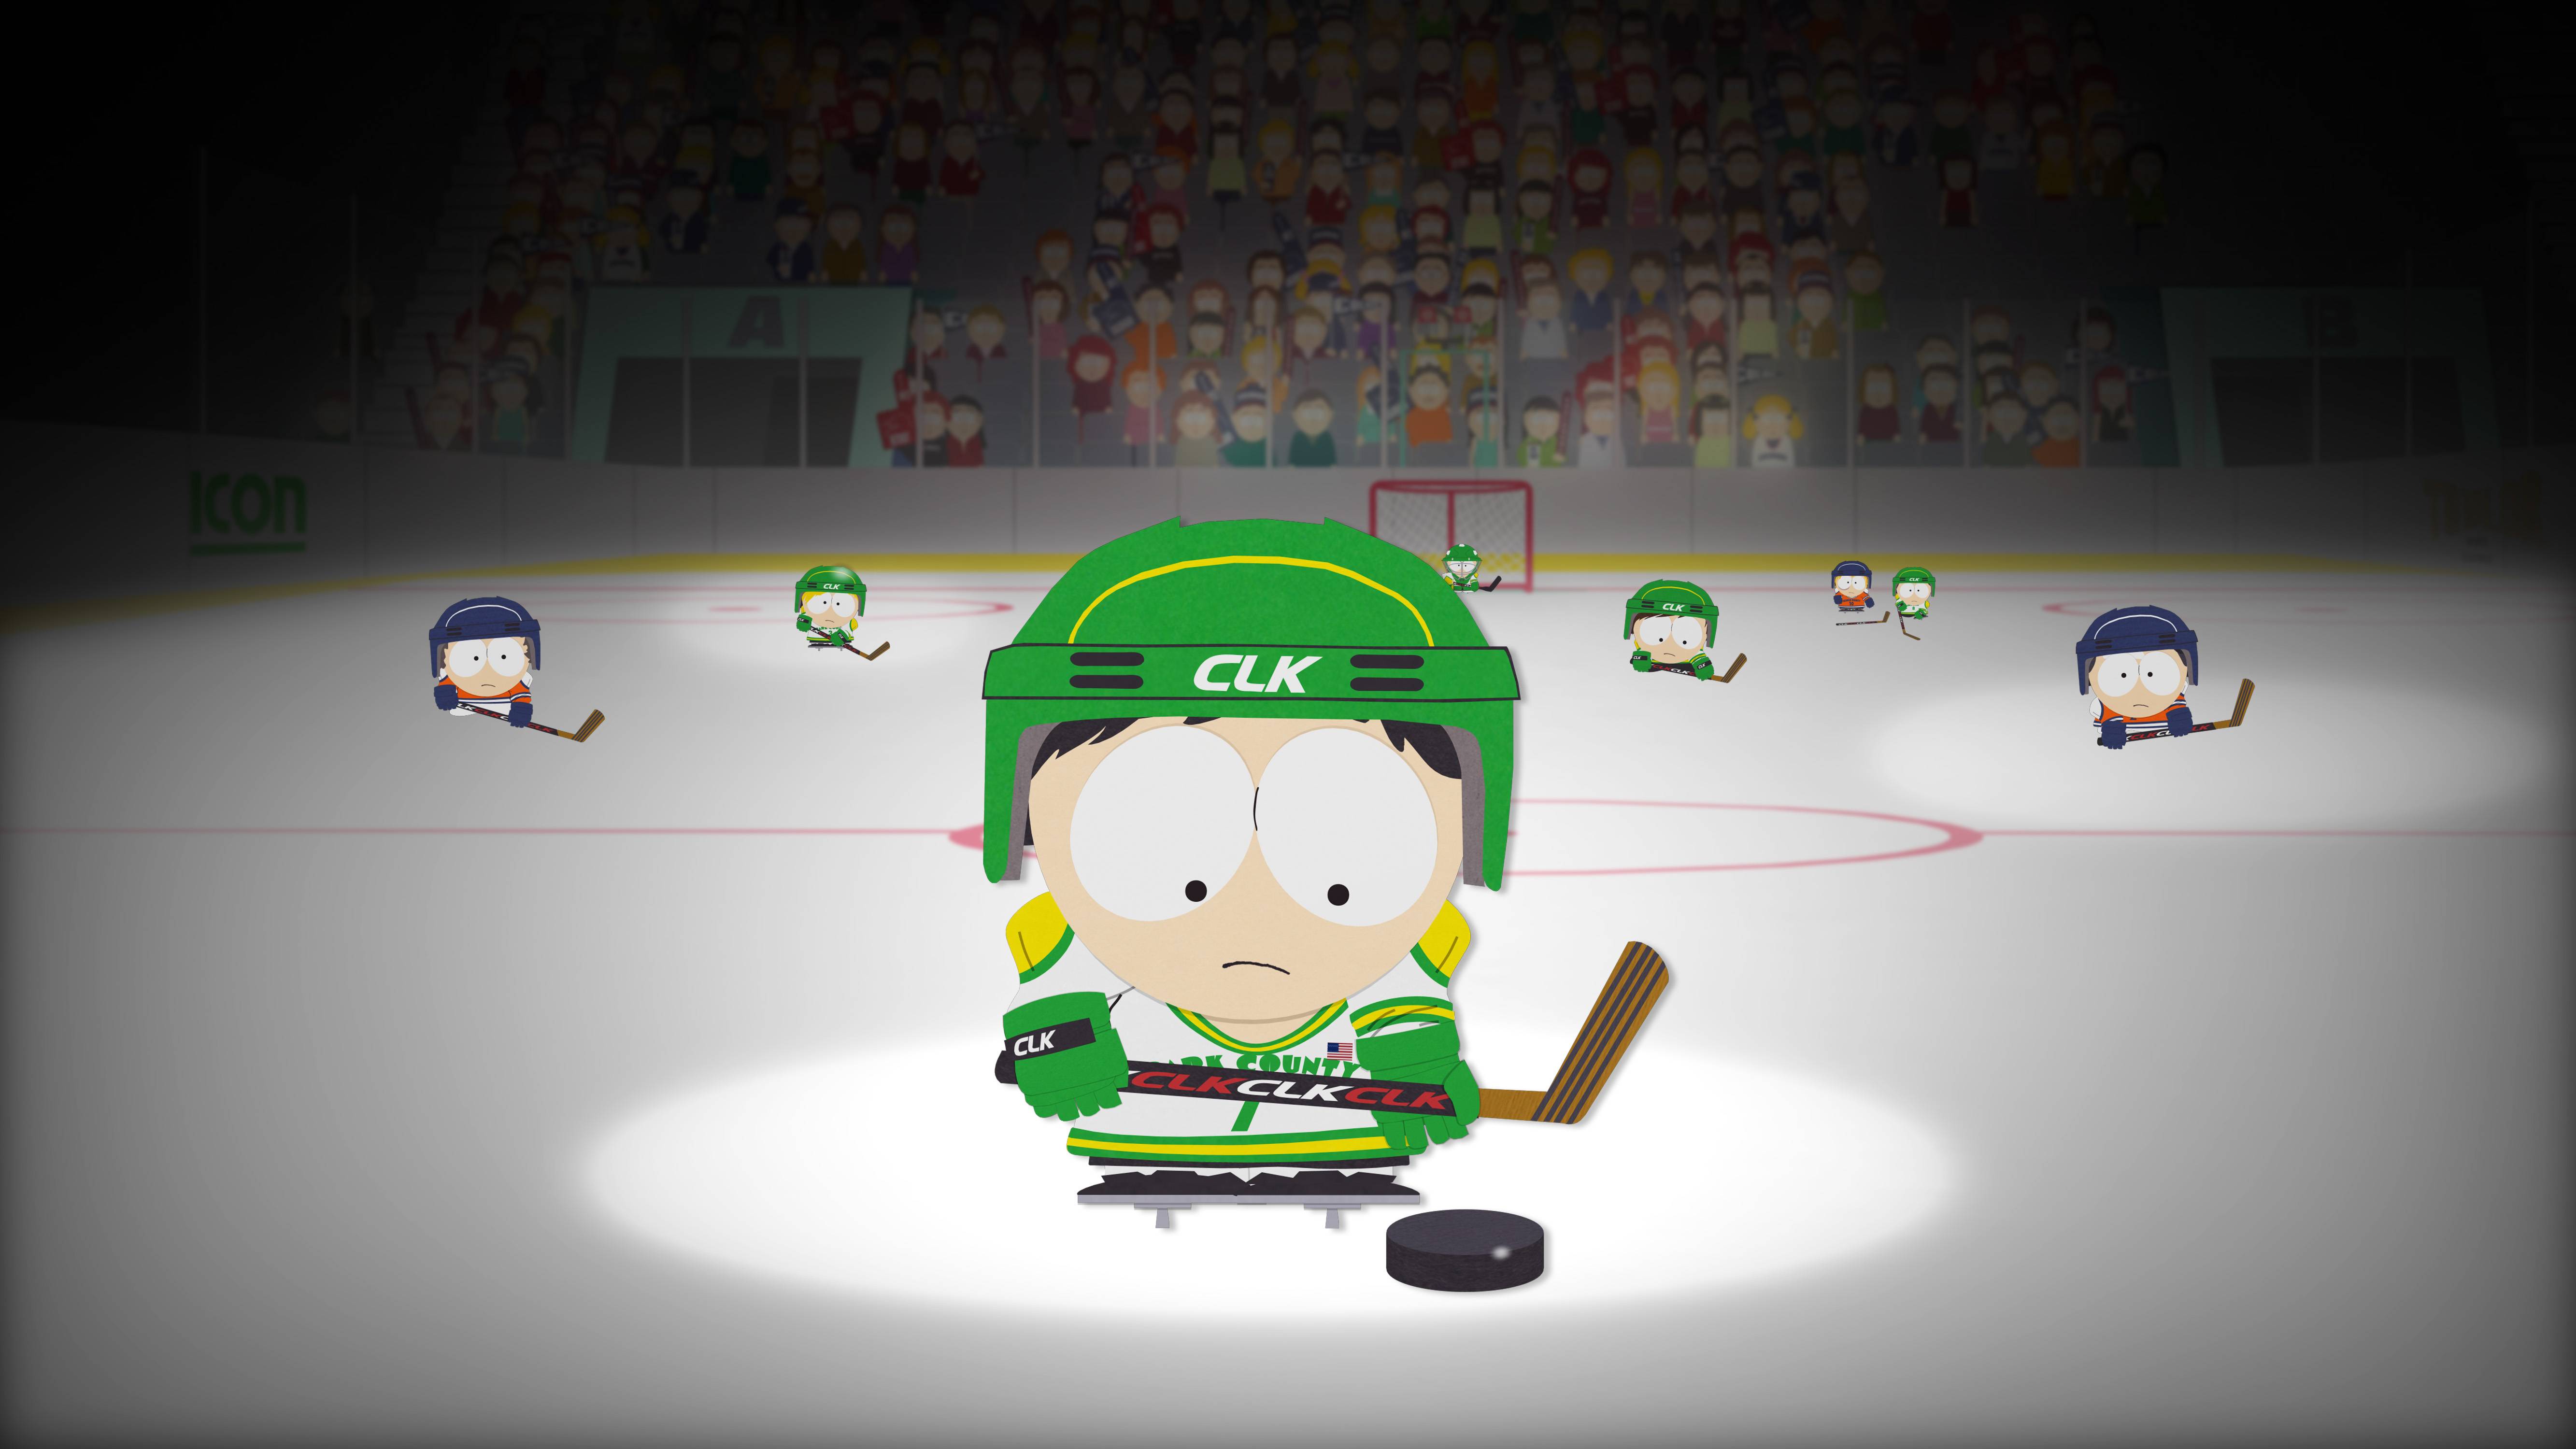 South Park Stanley's Cup (TV Episode 2006) - IMDb